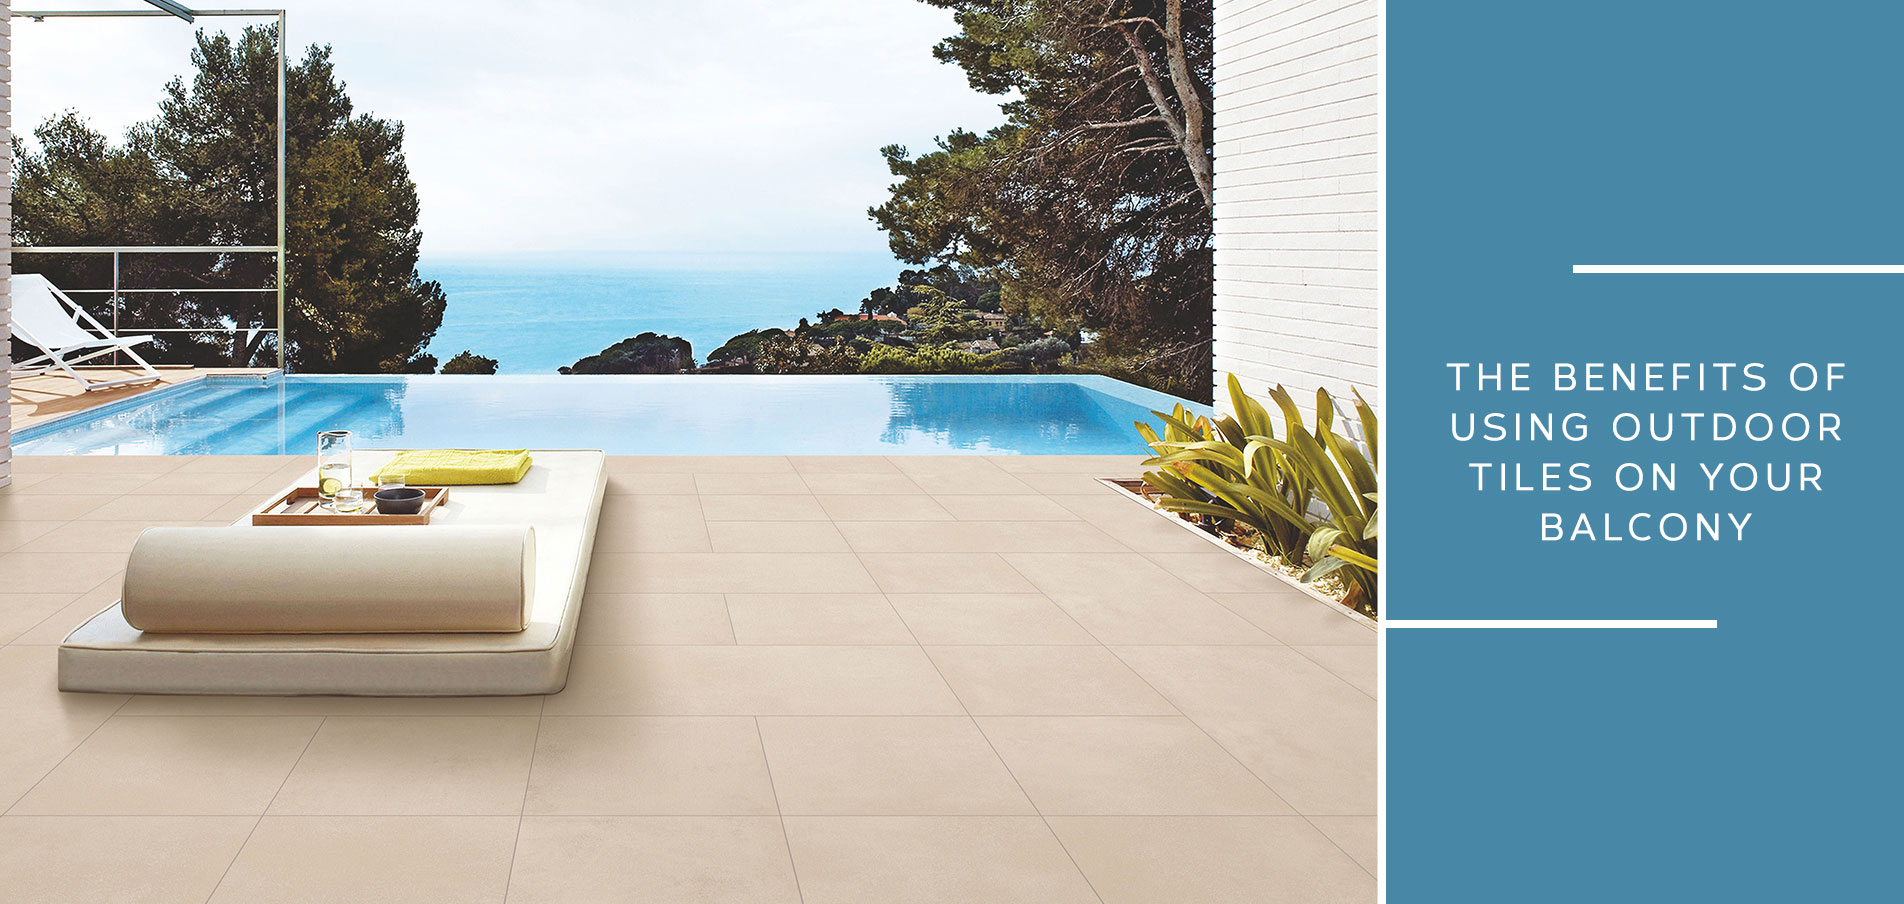 The benefits of using outdoor tiles on your balcony